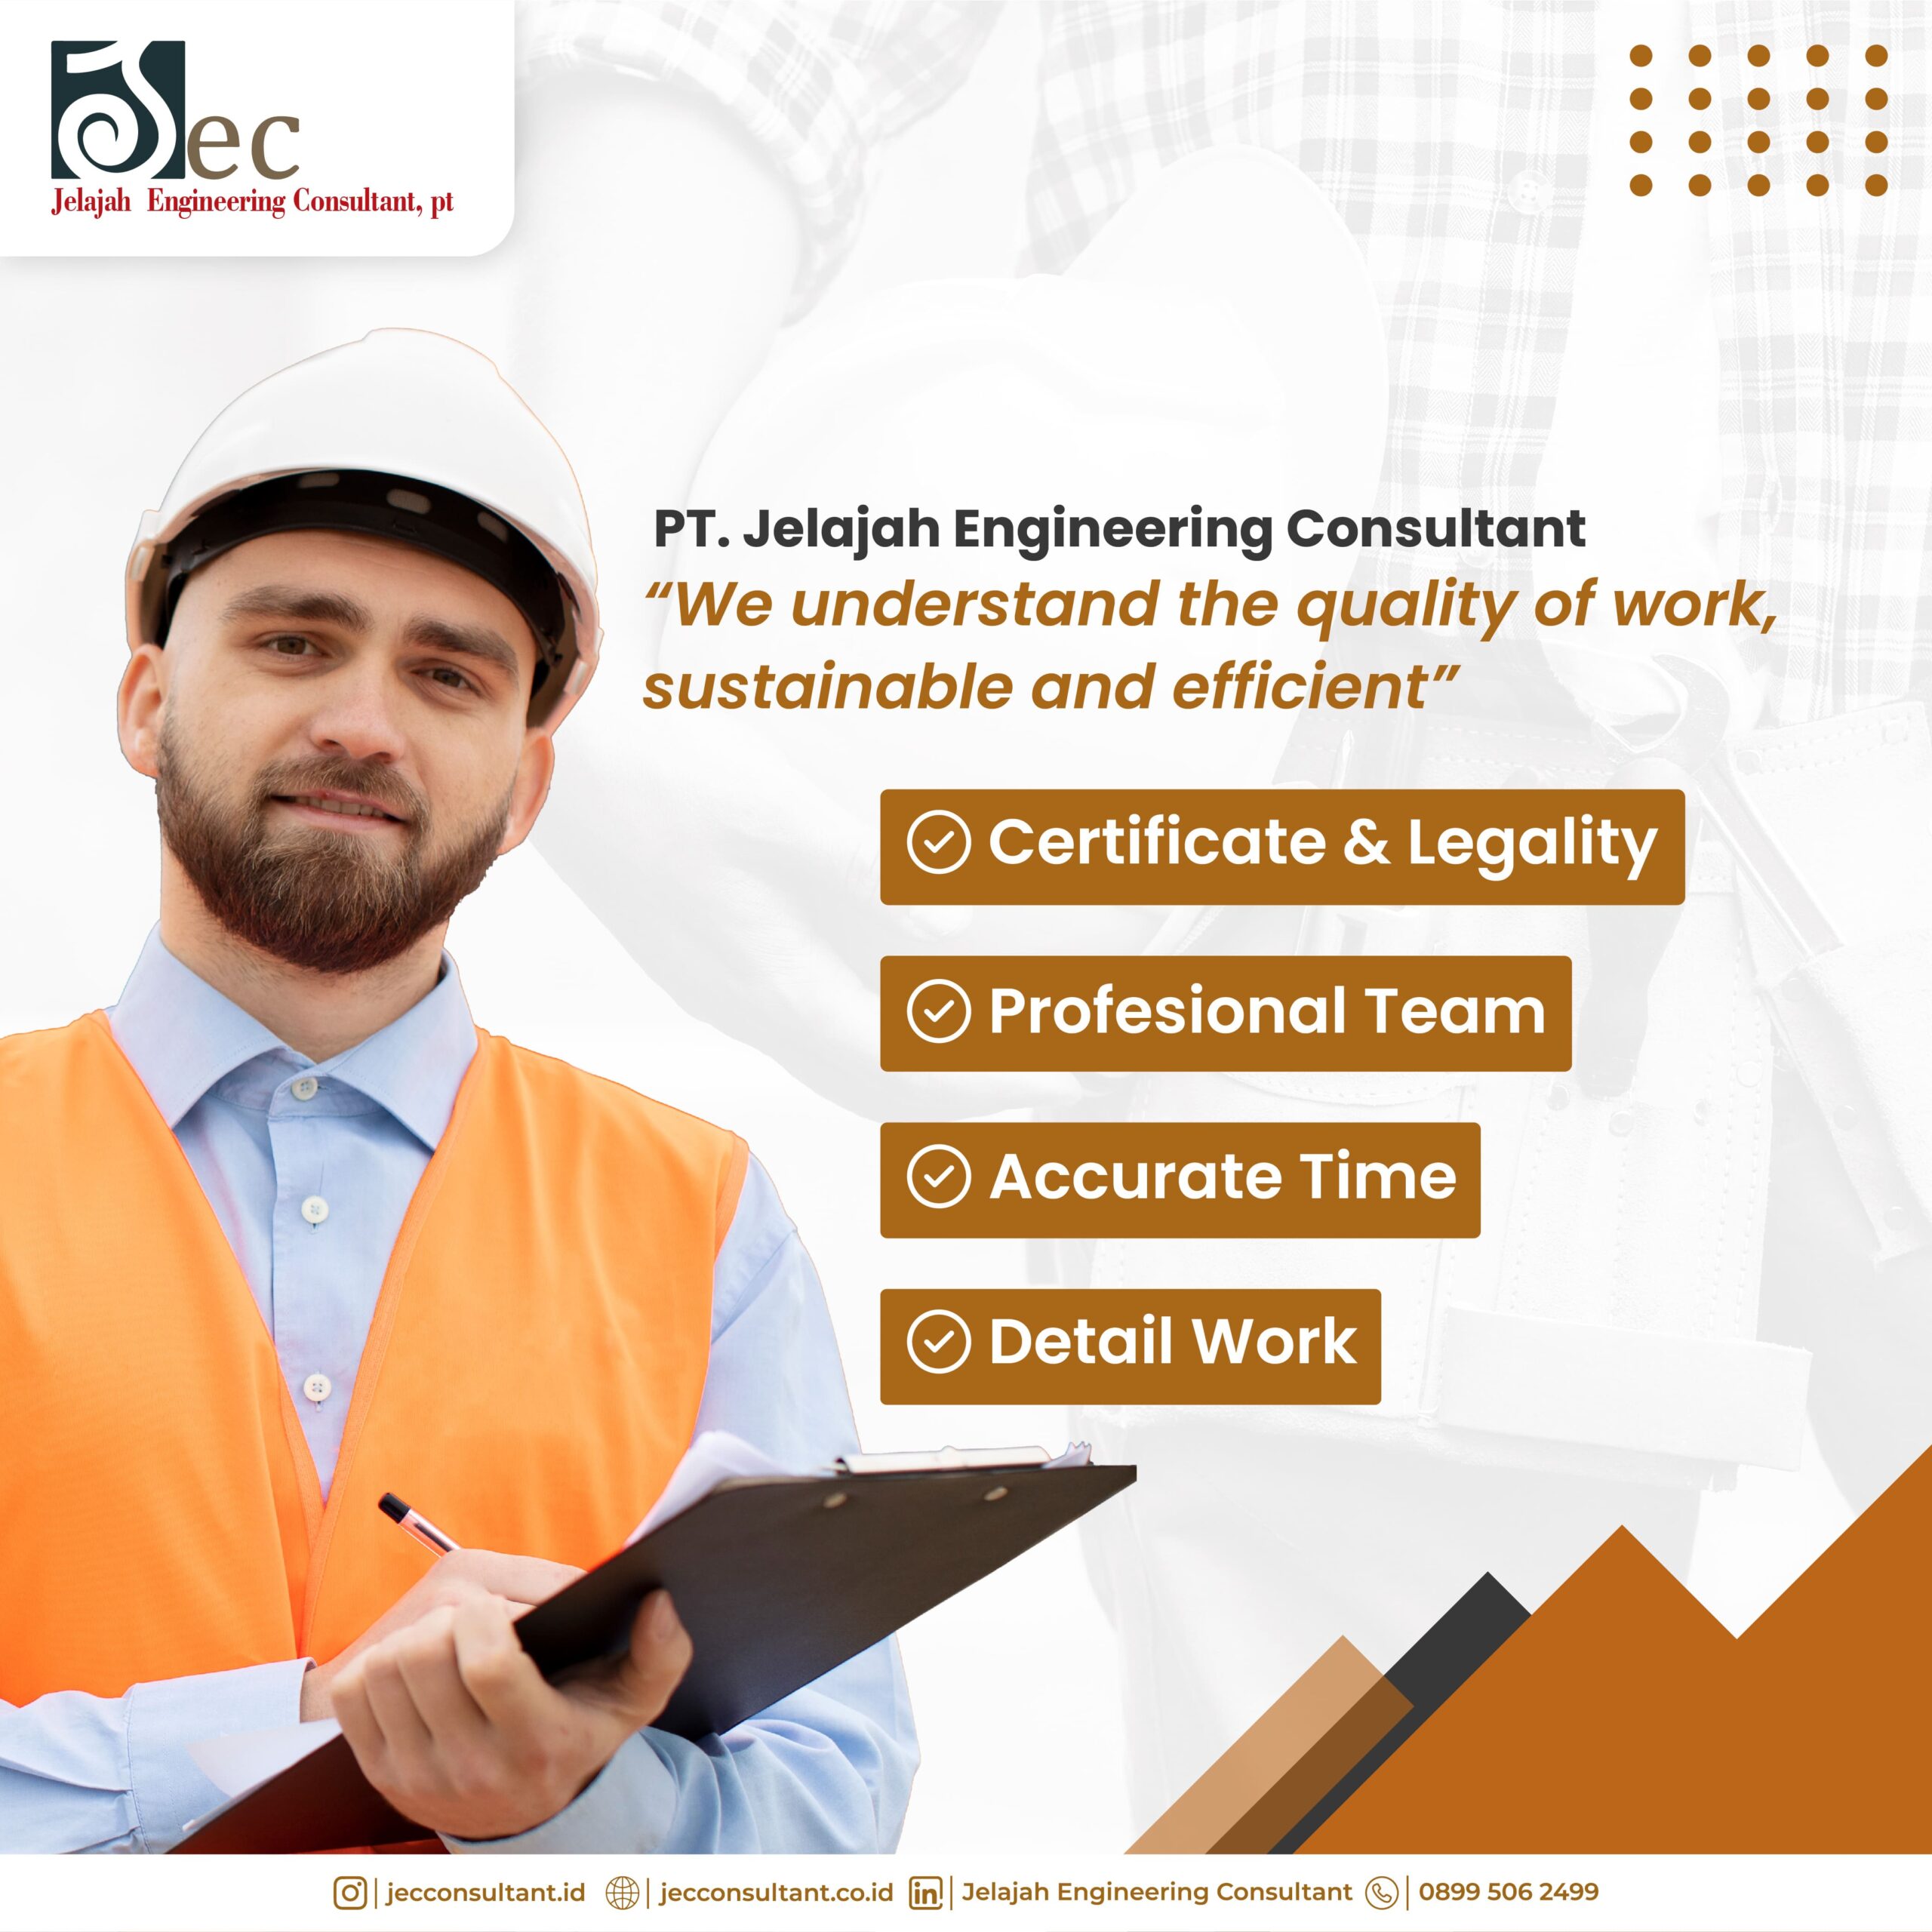 We Understand the Quality of Work, Sustainable and Efficient